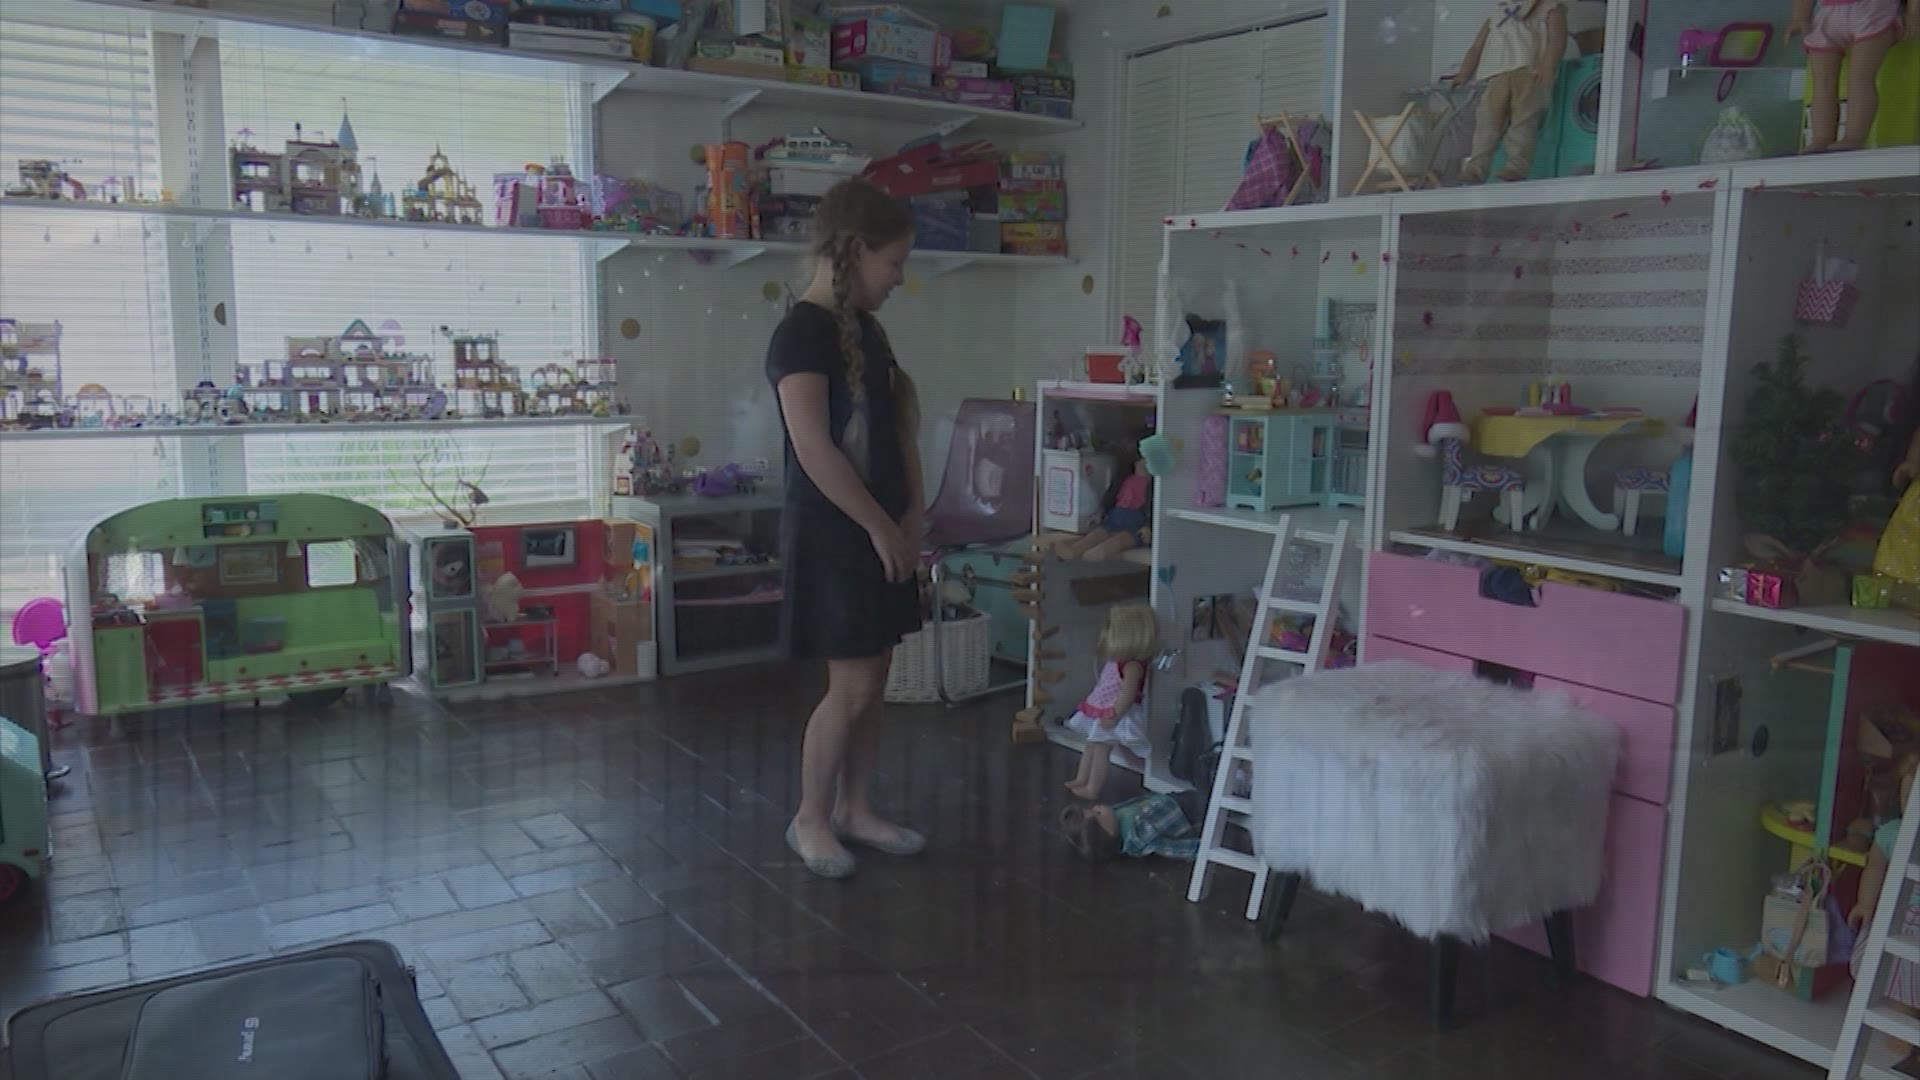 A Houston girl who helped young kids during Hurricane Harvey is now gearing up to help kids whose parents are on the front lines of the coronavirus pandemic.